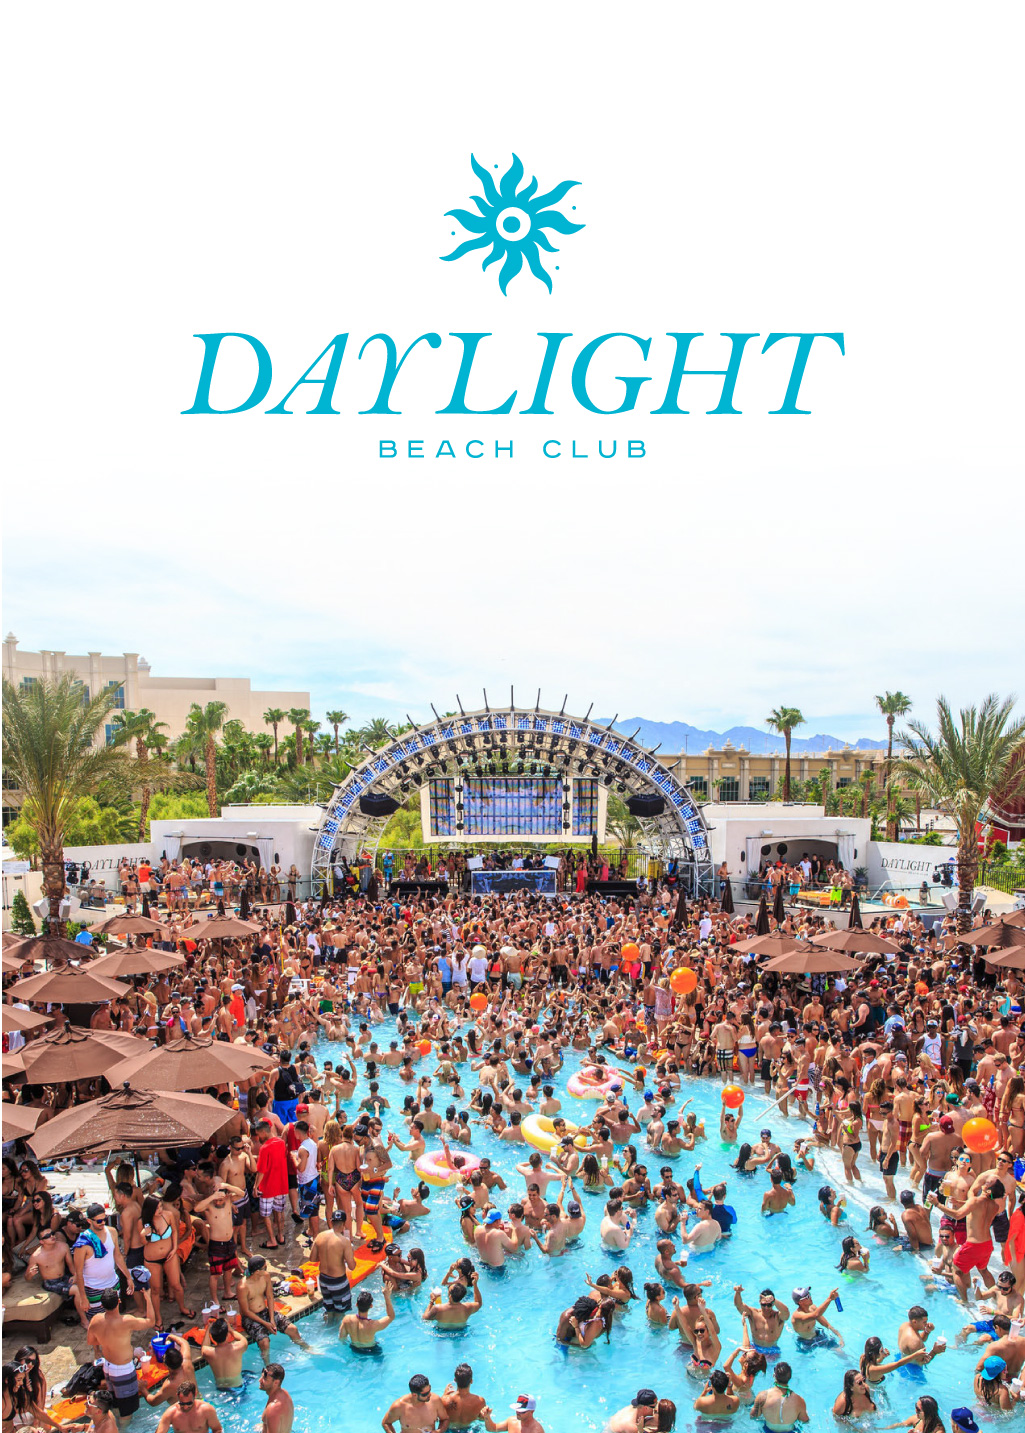 Soul Train Day Party at Daylight Beach Club on Saturday, November 5